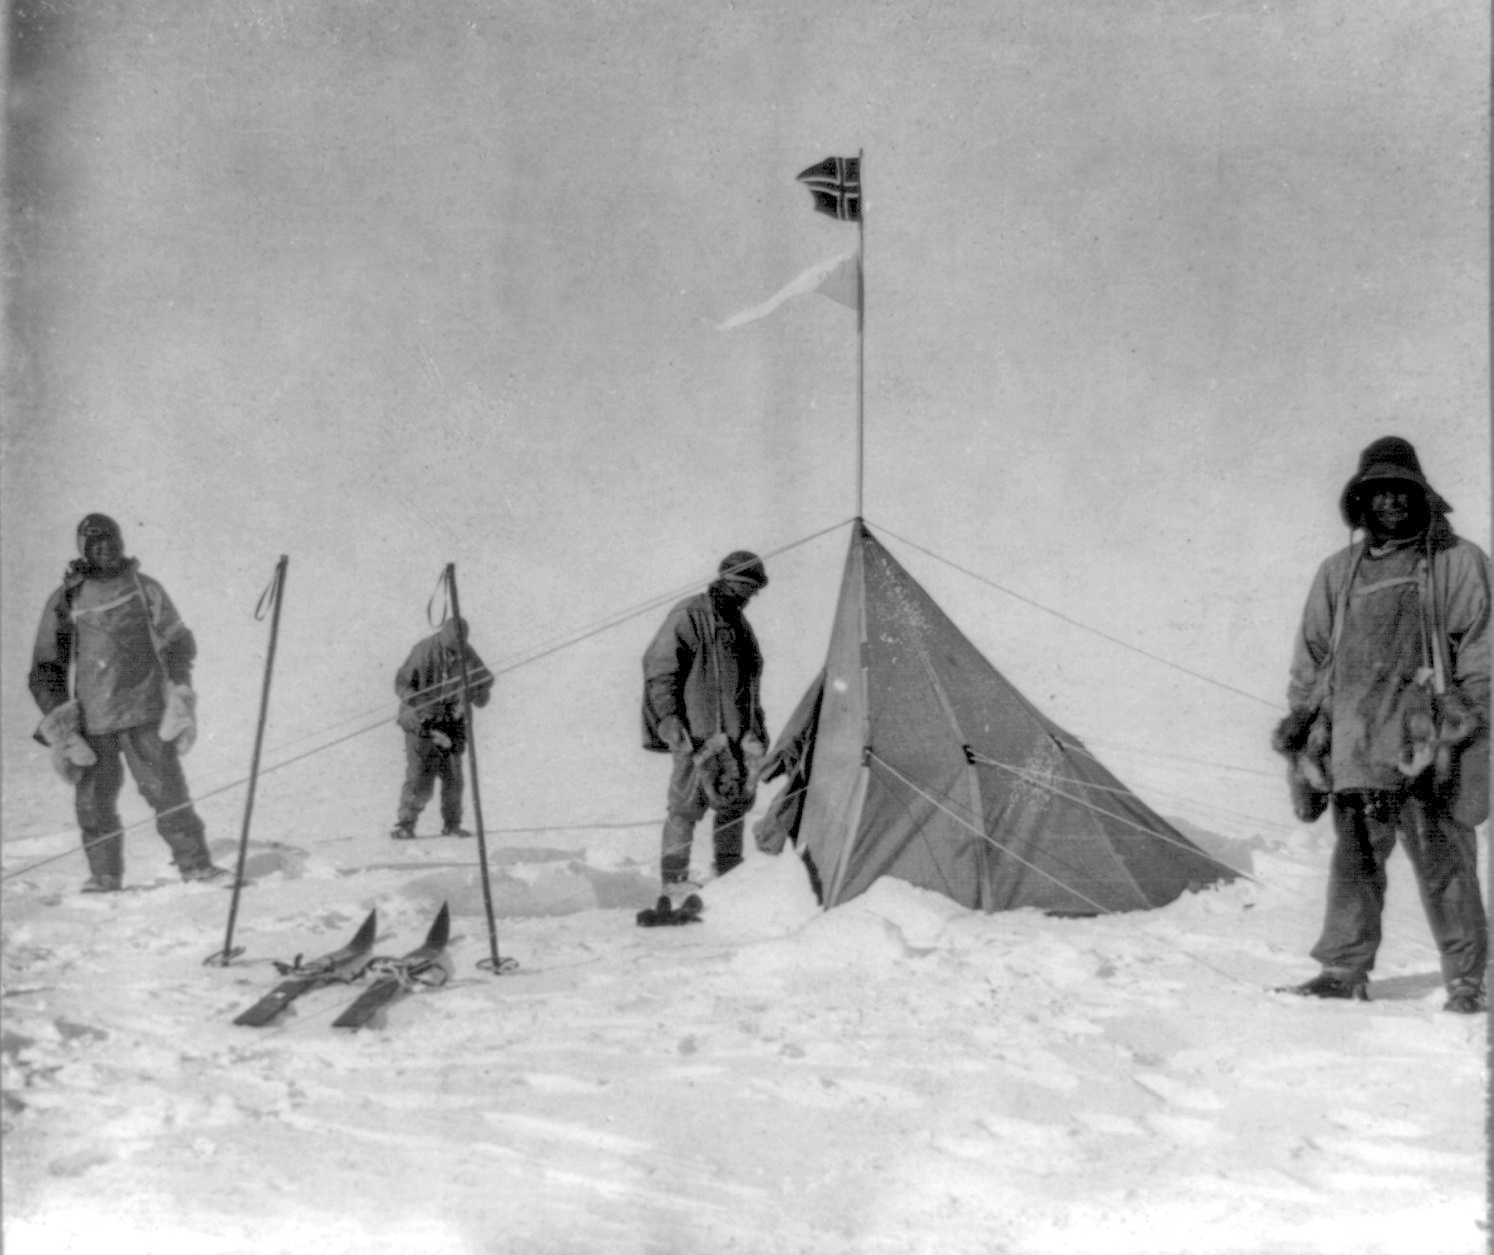 Scott and team see Norwegian flag at the South Pole